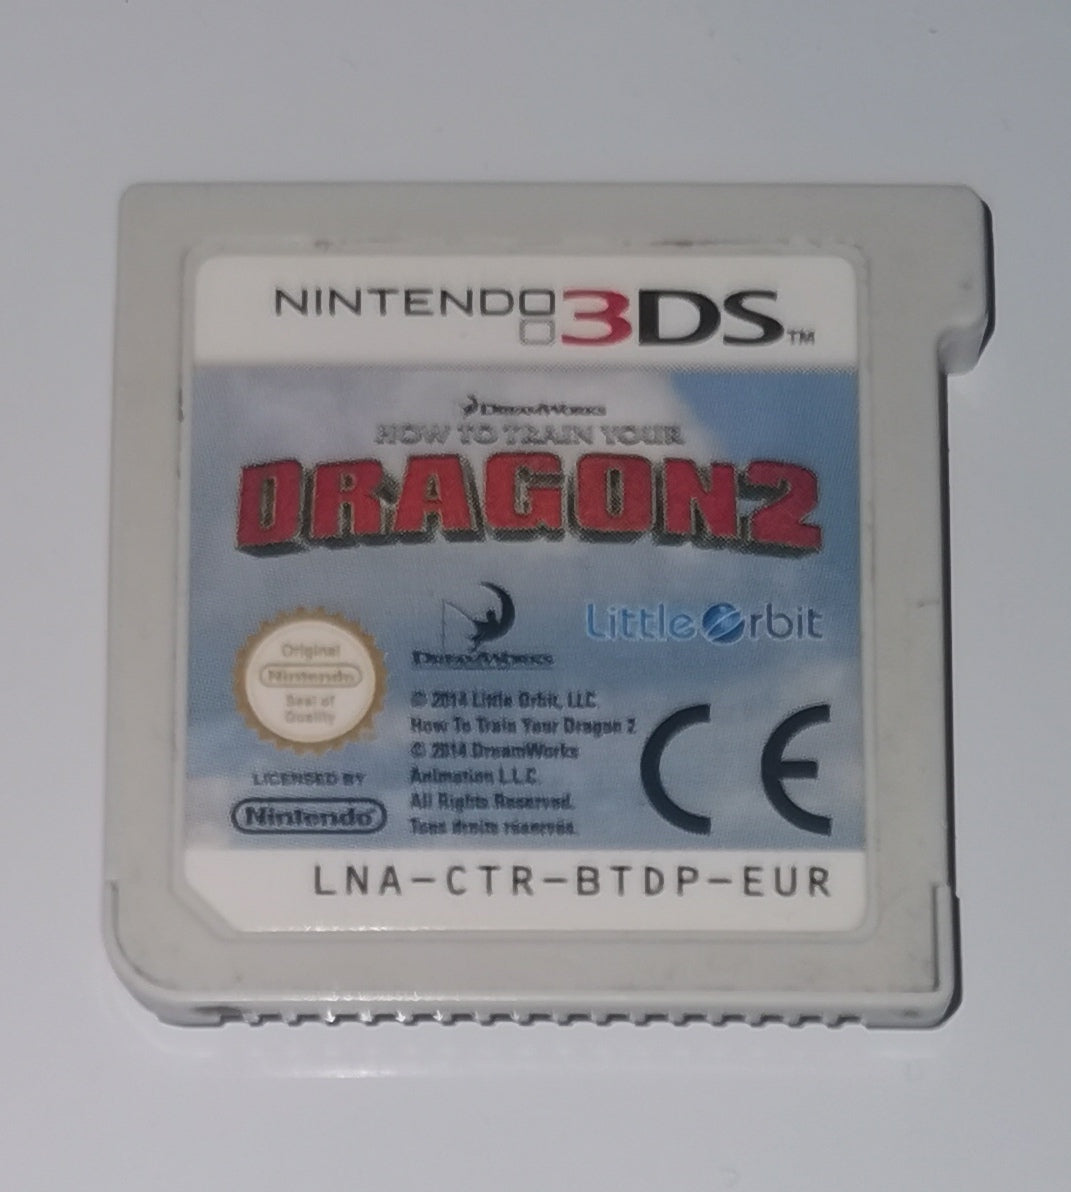 HOW TO TRAIN YOUR DRAGON 2 3DS FR (Nintendo 3DS) [Akzeptabel]